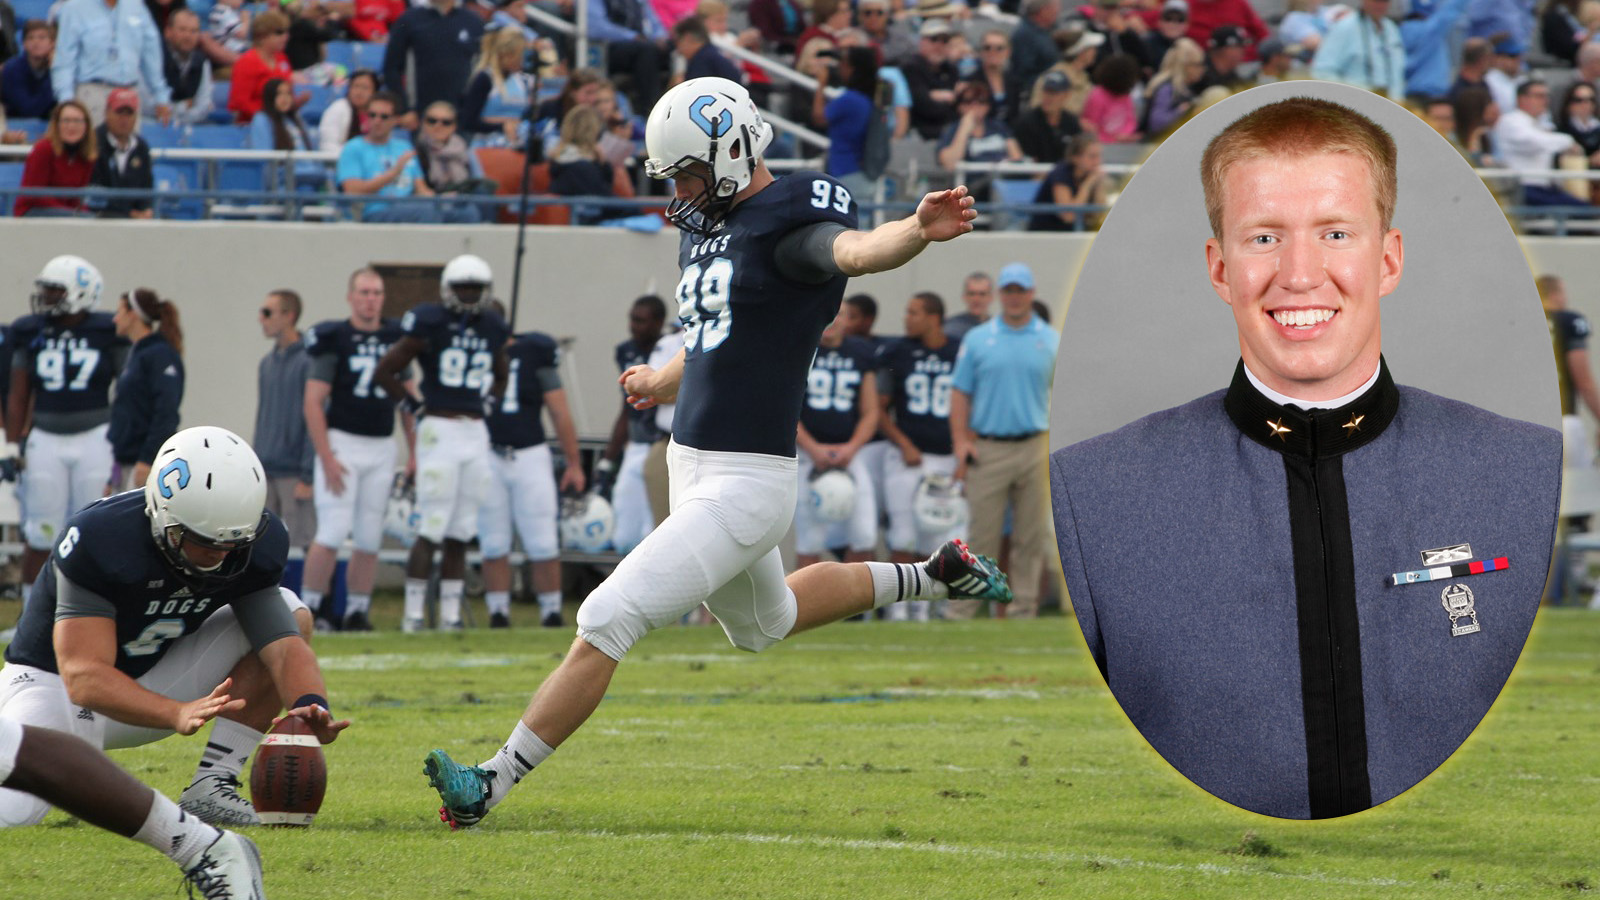 Notre Dame Adds New Kicker Who Graduated High School In 2012